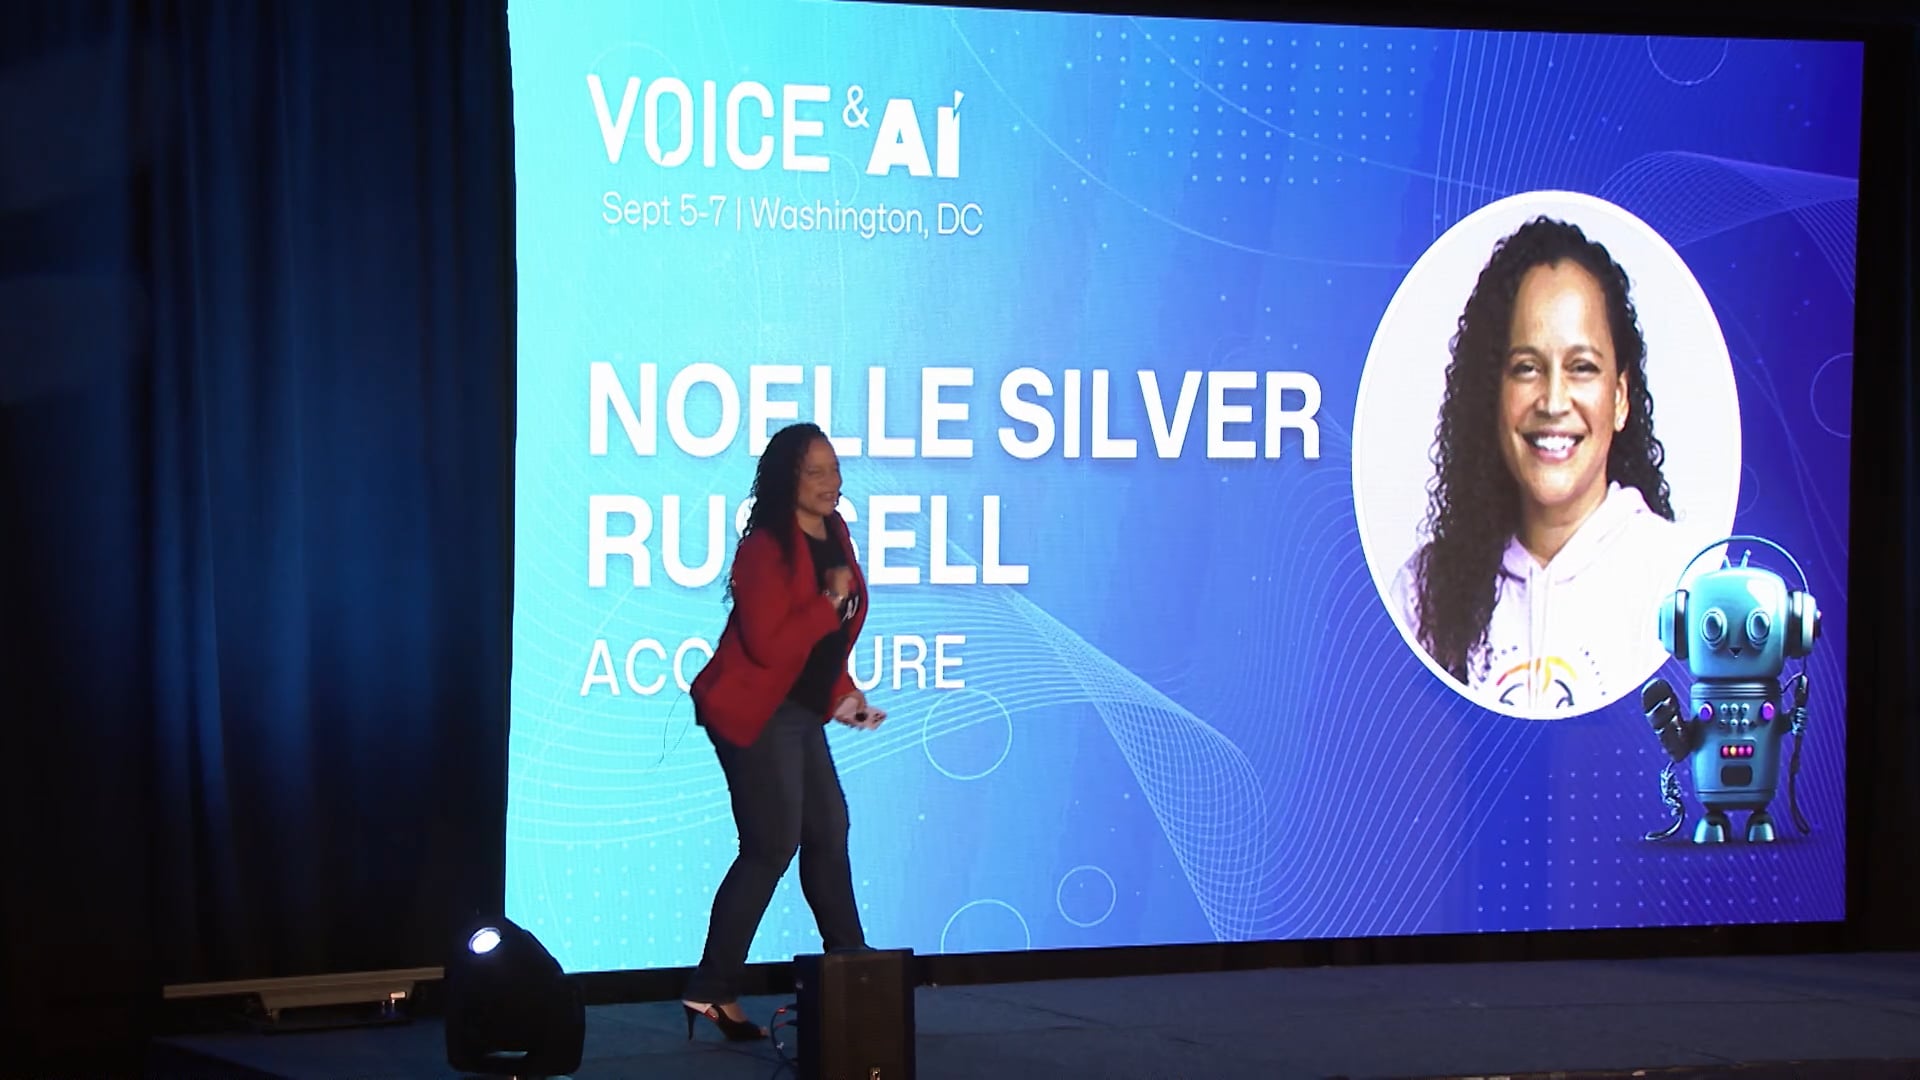 VOICE & AI 23 | Empowering Inclusive Innovation w/Ethical AI: Nurturing Creativity & Protecting Humanity | Noelle Silver Russell